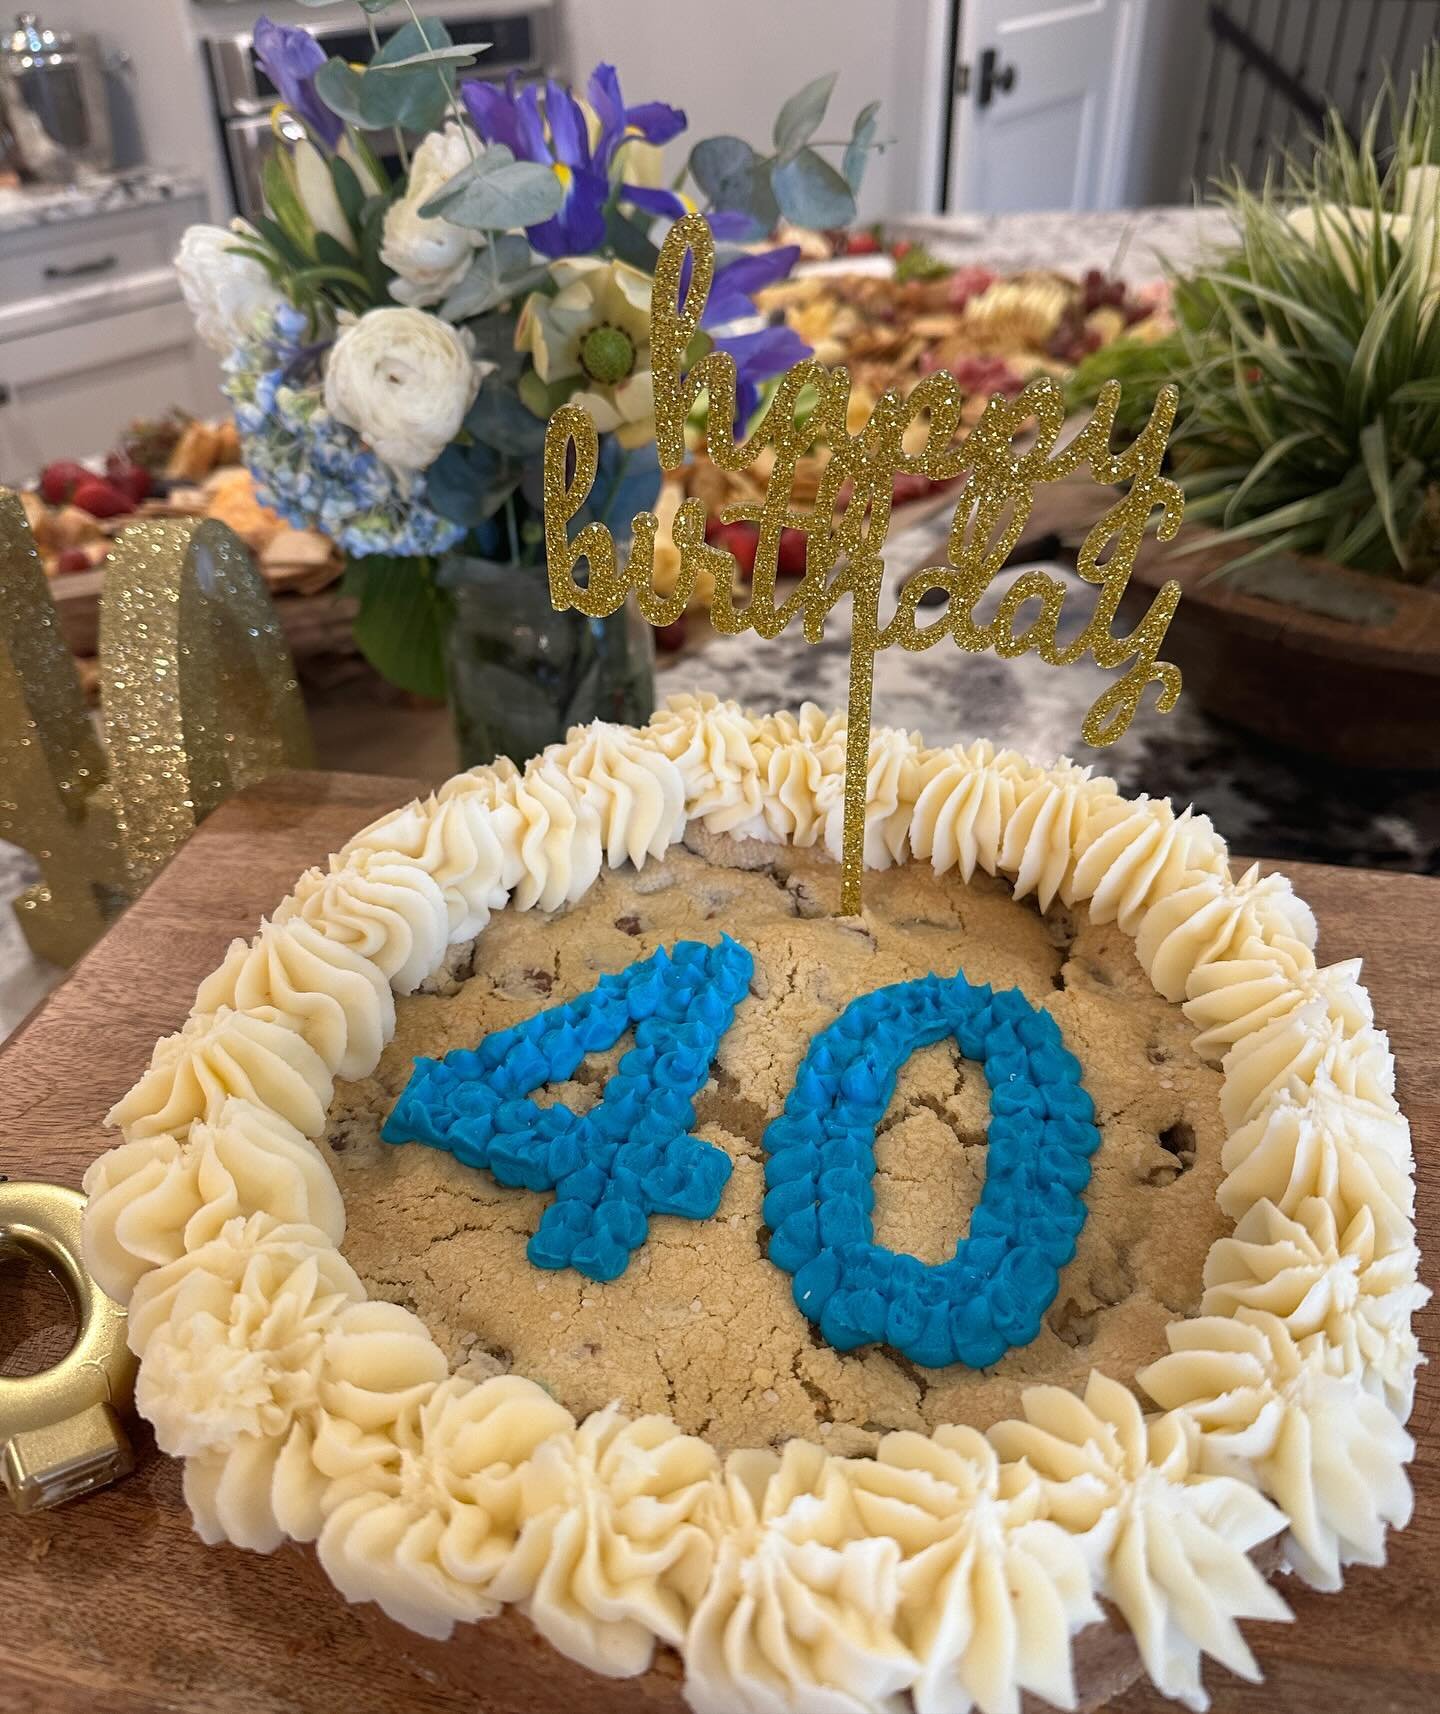 Each one of these cookies represents a special moment, a snapshot in time, a milestone! I feel so lucky to be a small part of each occasion! Cookie cakes FTW!

#cookiecake #cookiecakes #frostedcookies #sosweet #sweetiesdough #sweettreat #homemadecake